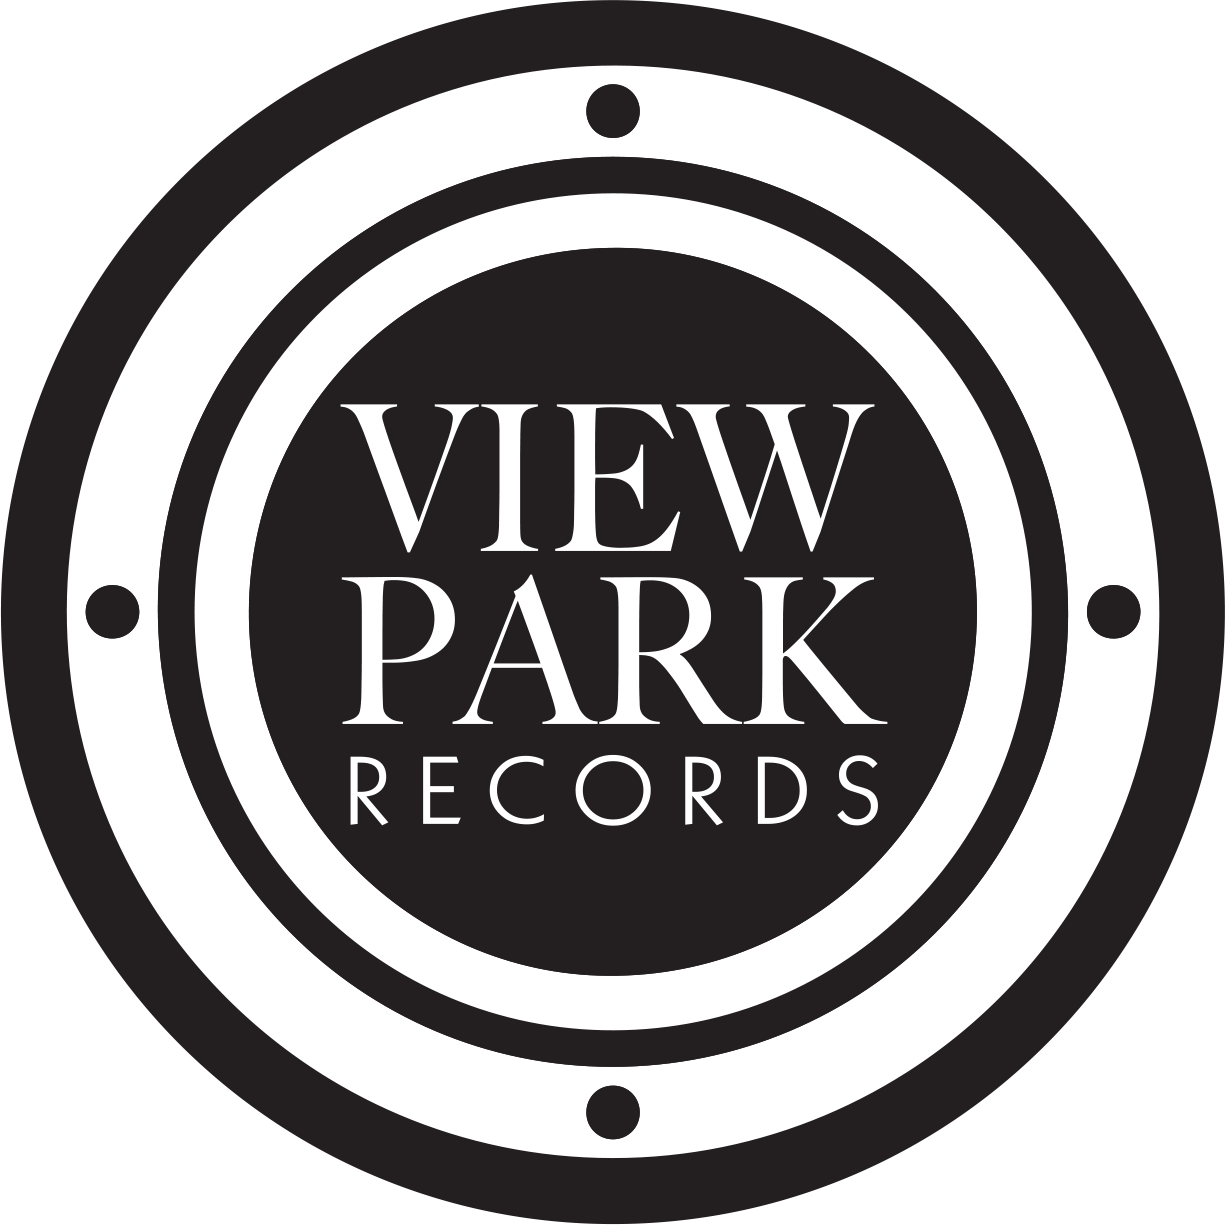 View Park Records